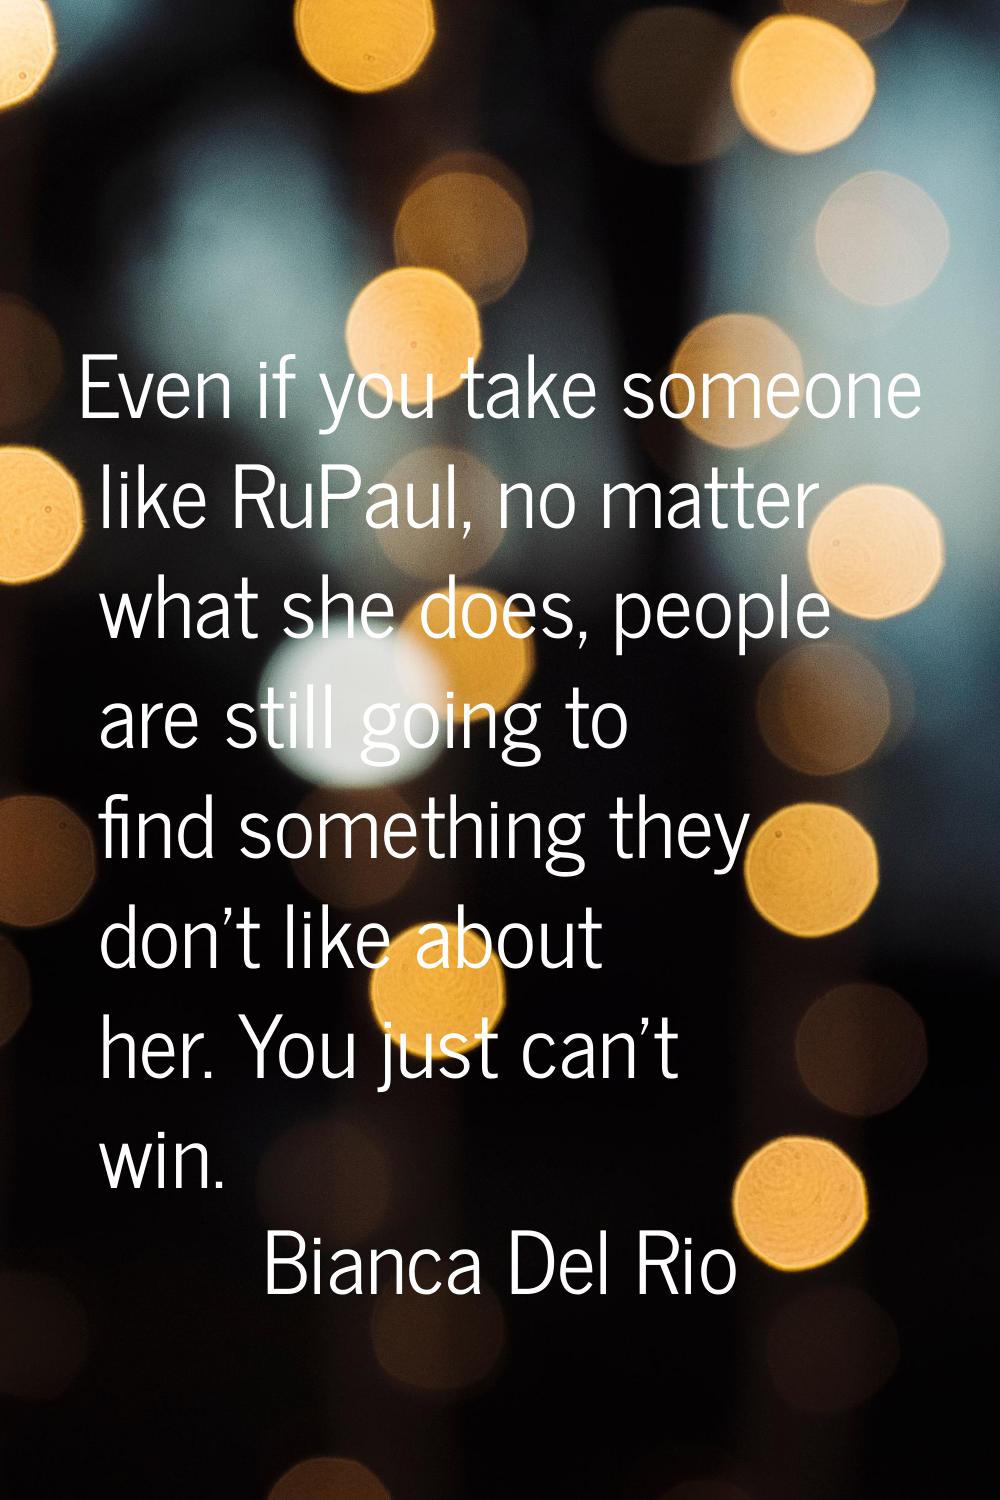 Even if you take someone like RuPaul, no matter what she does, people are still going to find somet